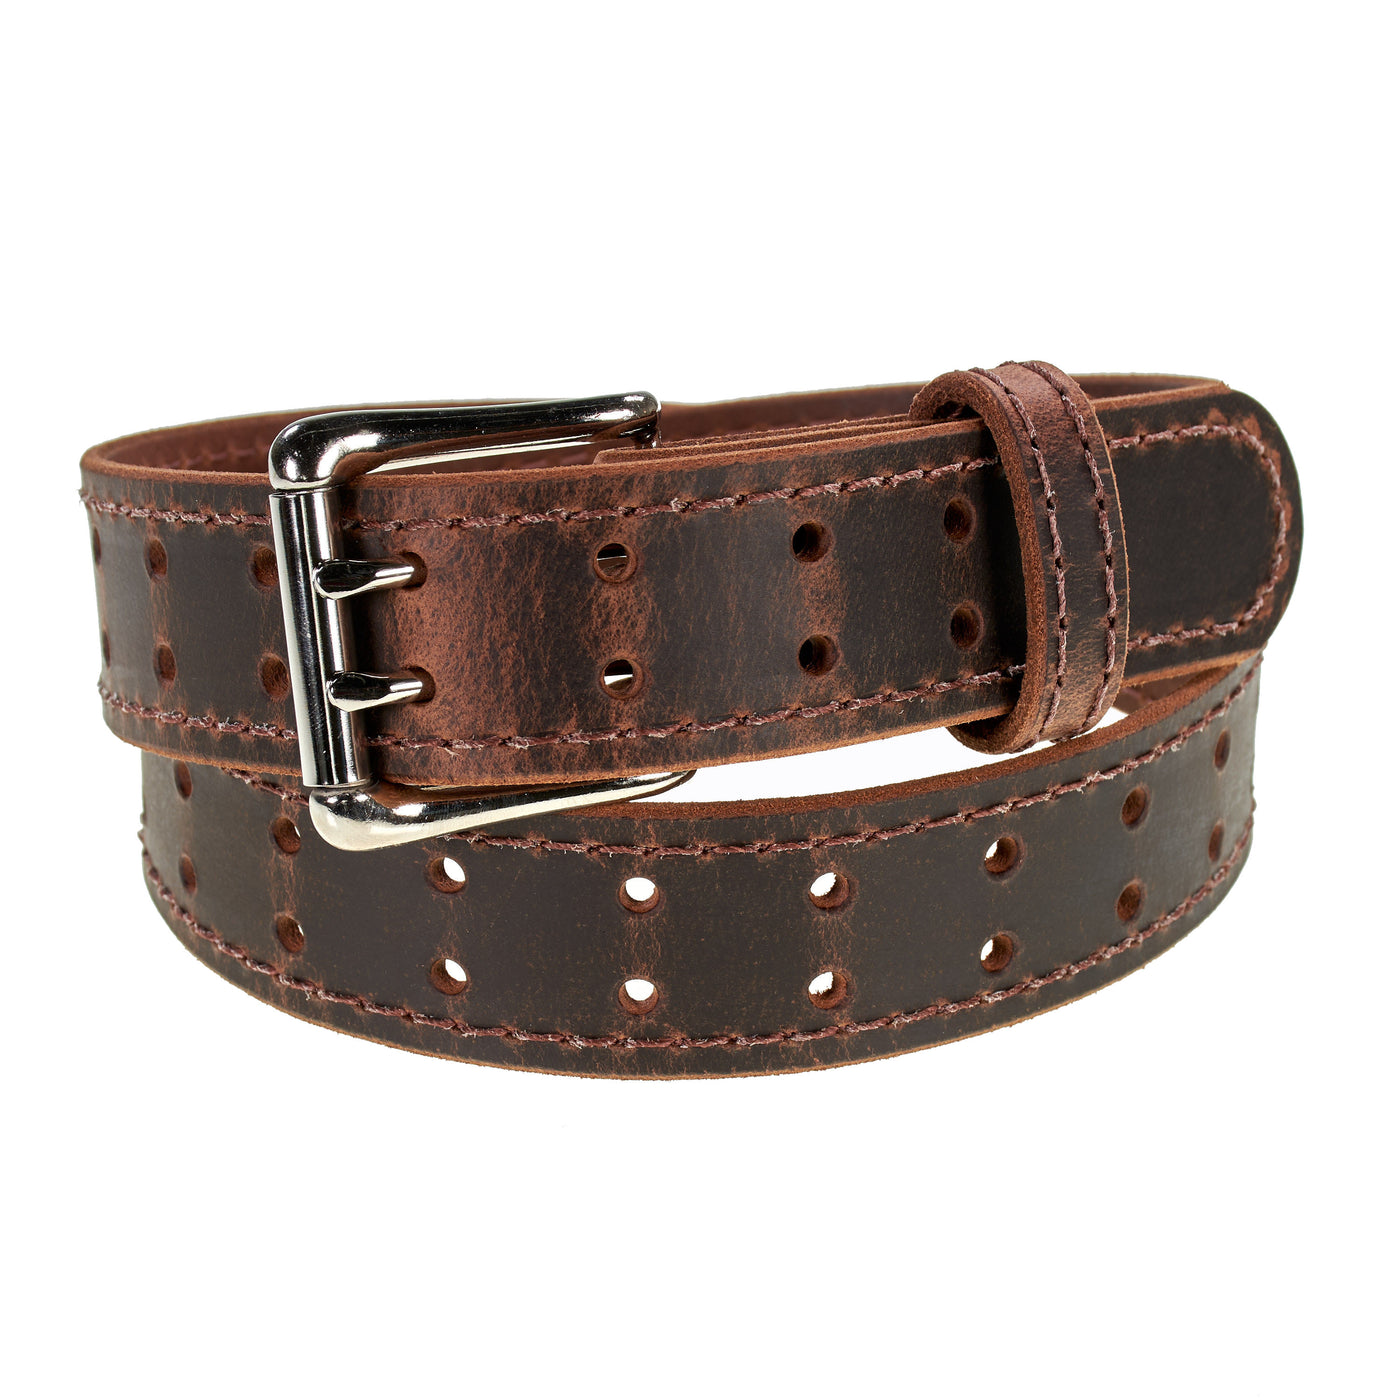 Double Prong Retro Style Leather Belt - 1.5" Nickel Buckle